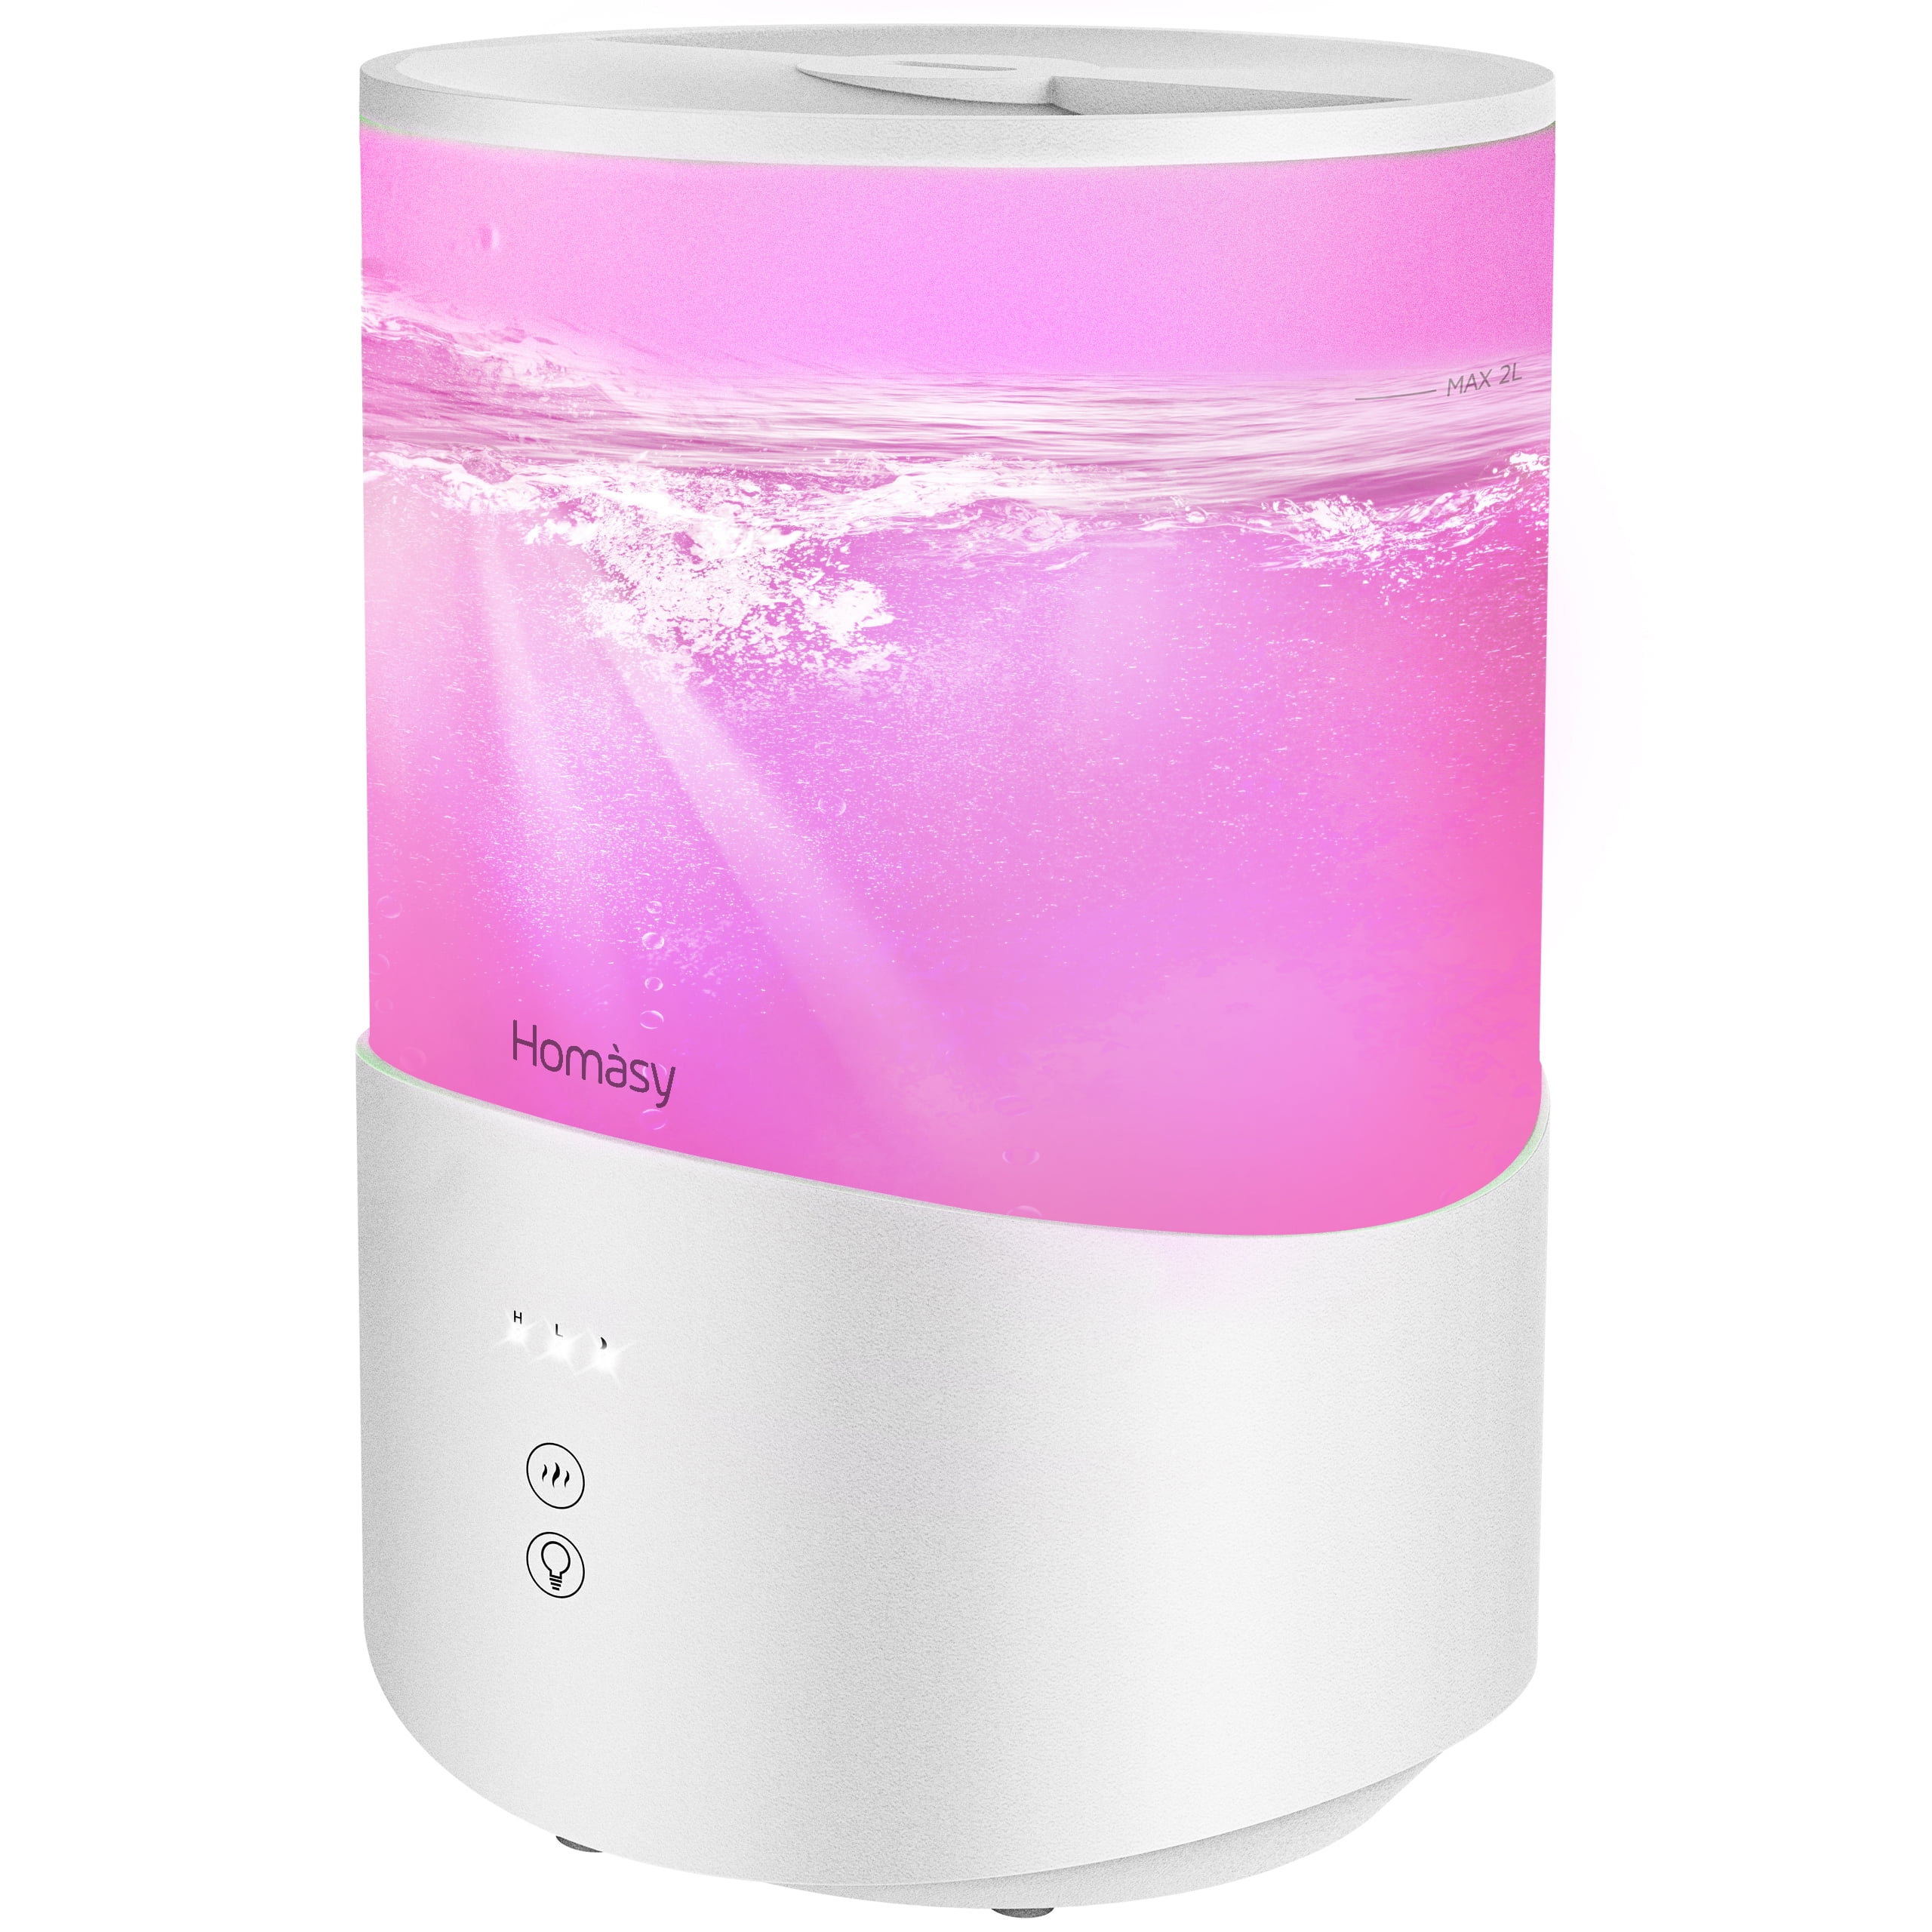 Sleep Mode Auto Shut Off-Purple Essential Oil Diffuser with 7-Colour Mood Lights HomasyS Cool Mist Humidifier 2.5L Baby Humidifier with Adjustable Mist Output Top Fill Humidifier for Bedroom 